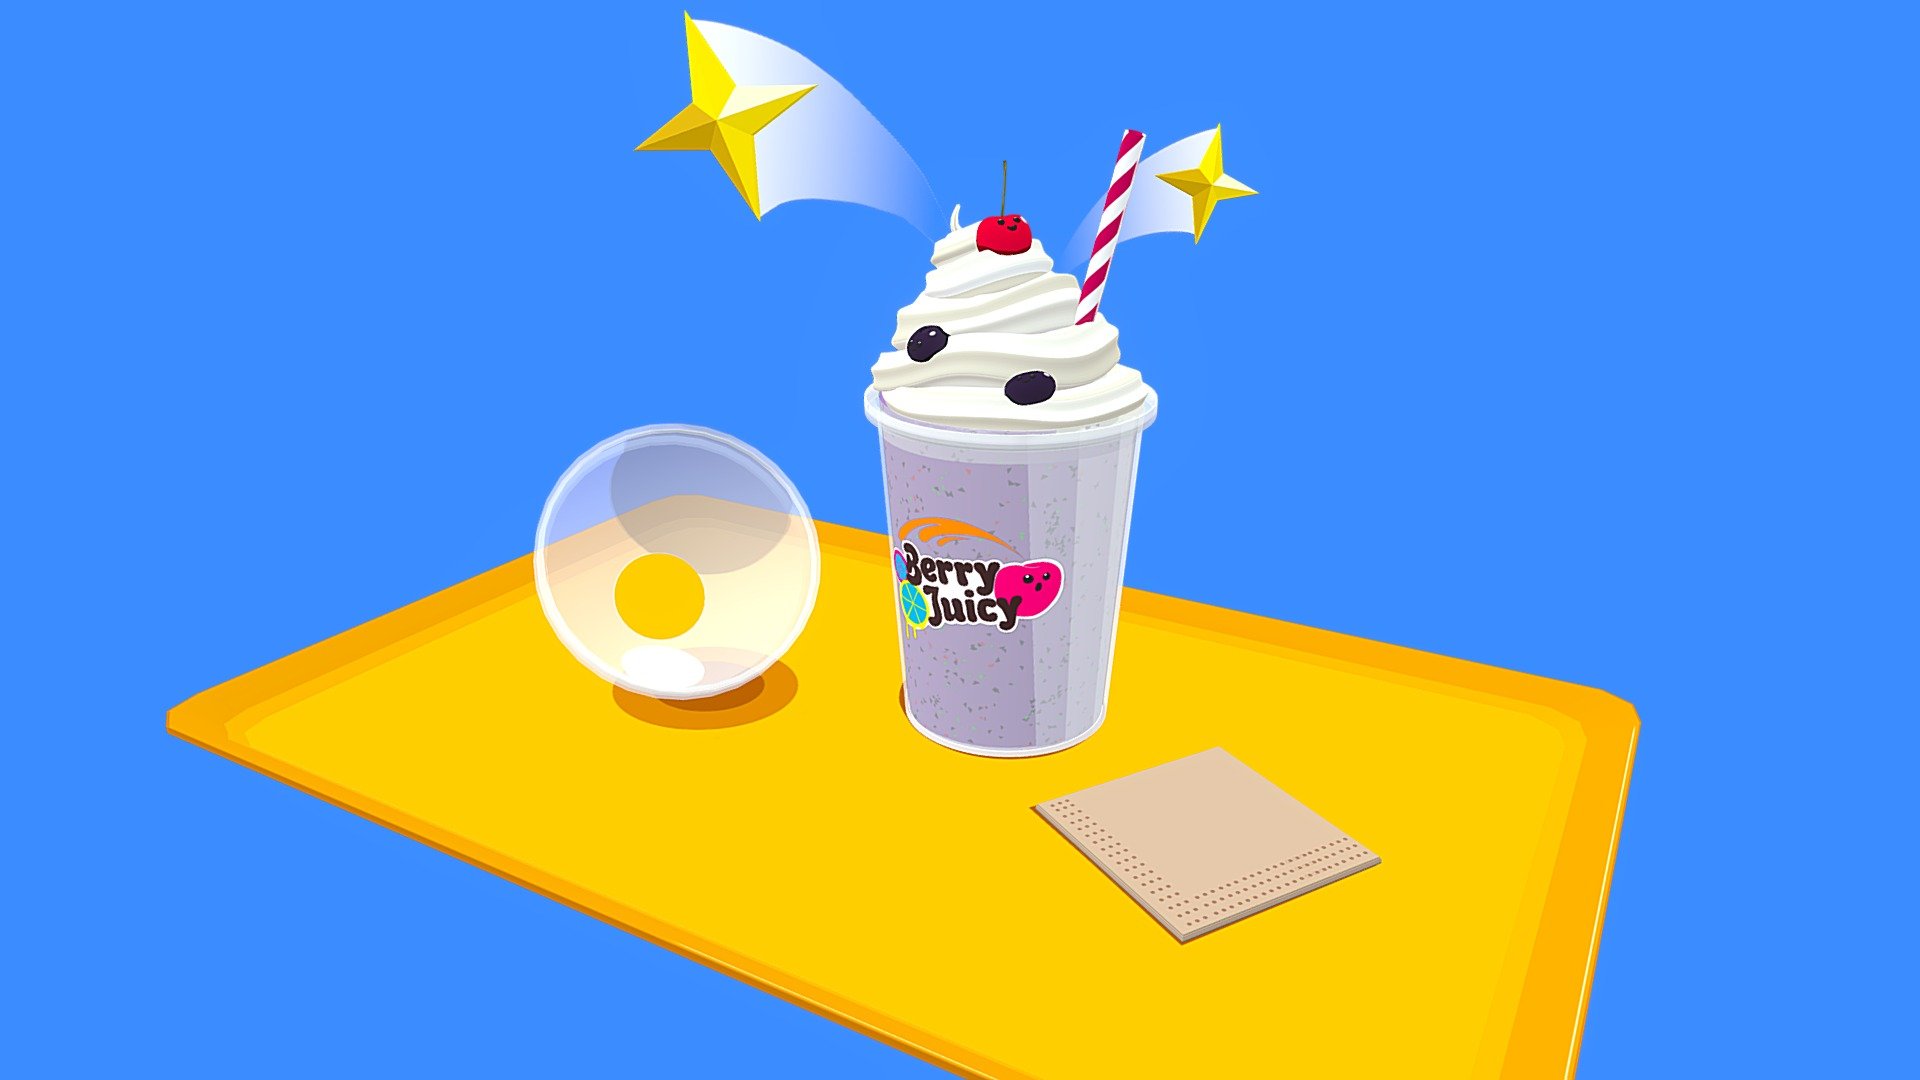 I was recently inspired to do some smoothies irl, so I decided I should do one in 3D too. The original intention was to use realistic shaders and work with the transparent plastic material, but then I realized it was going to be really tricky to recreate it in Sketchfab so I changed to a completely cartoon style 3d model